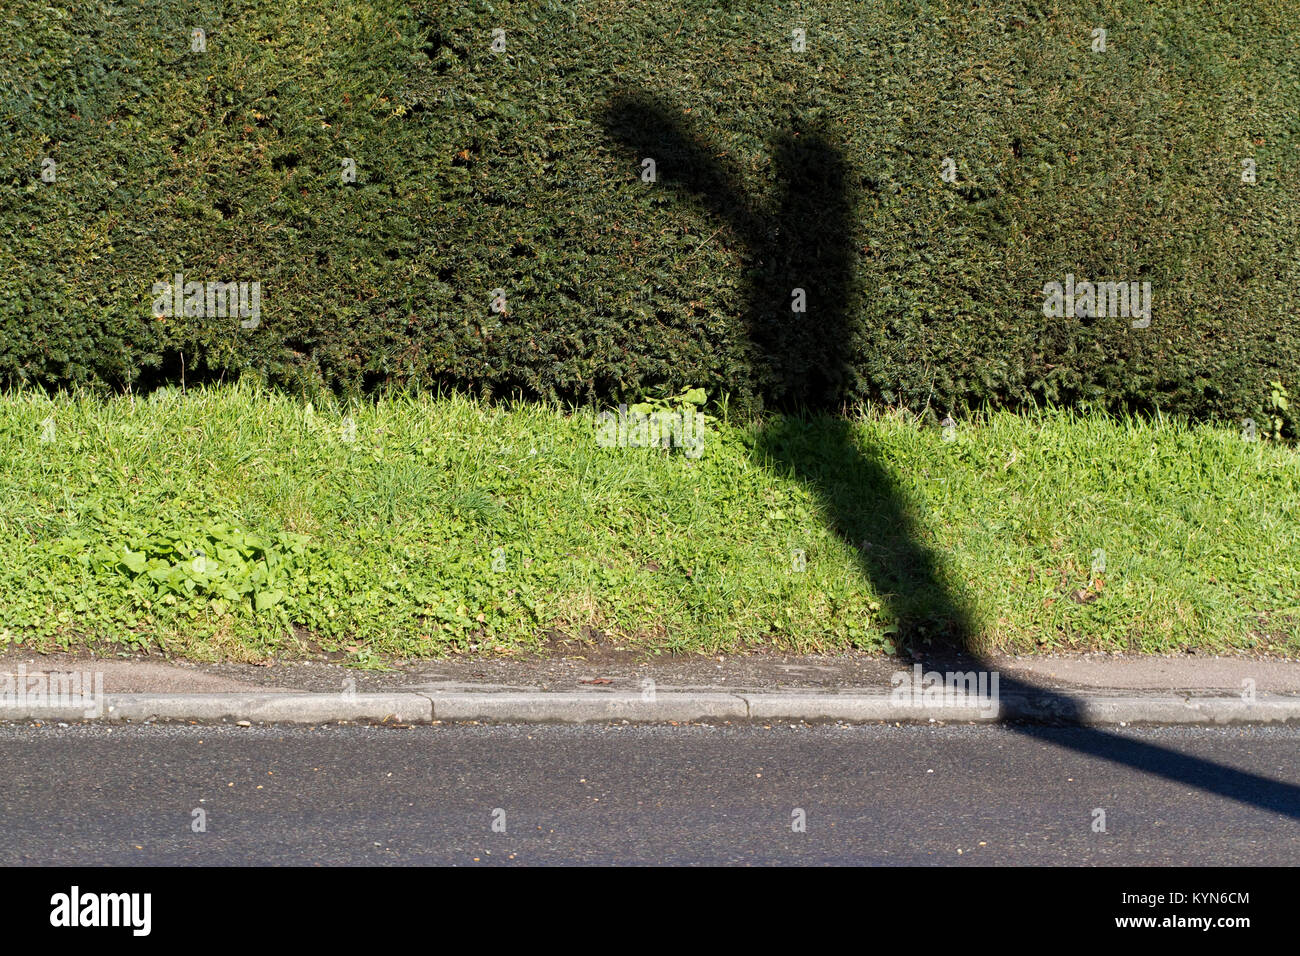 Odd shaped shadow being cast by a street light on a hedge and grass verge Stock Photo